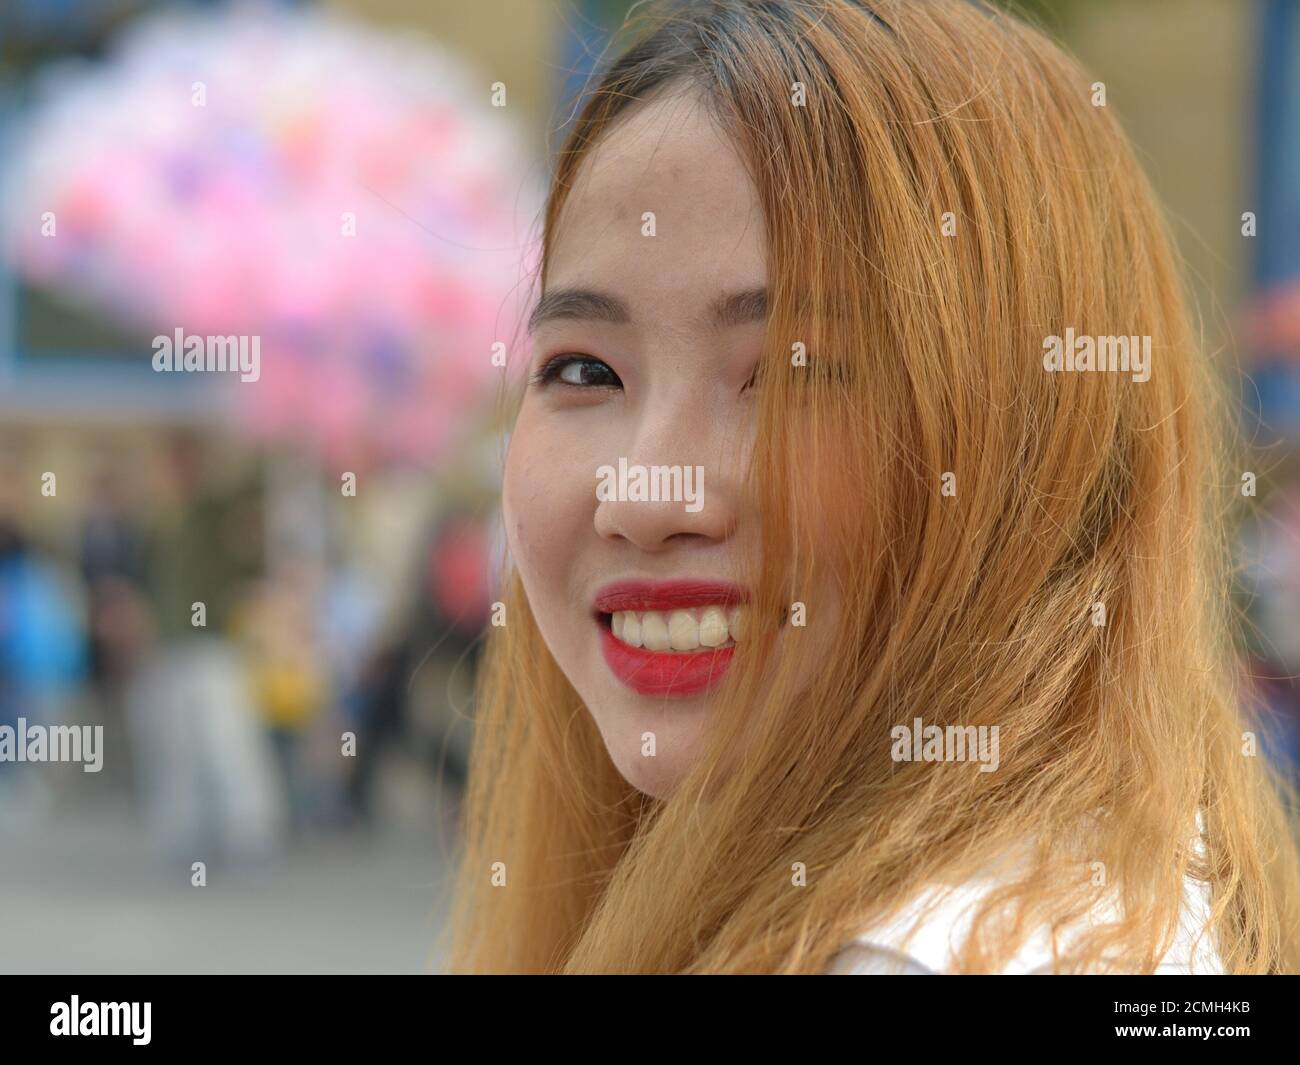 Young Vietnamese woman with dyed hair and red lipstick looks over her shoulder and smiles for the camera. Stock Photo